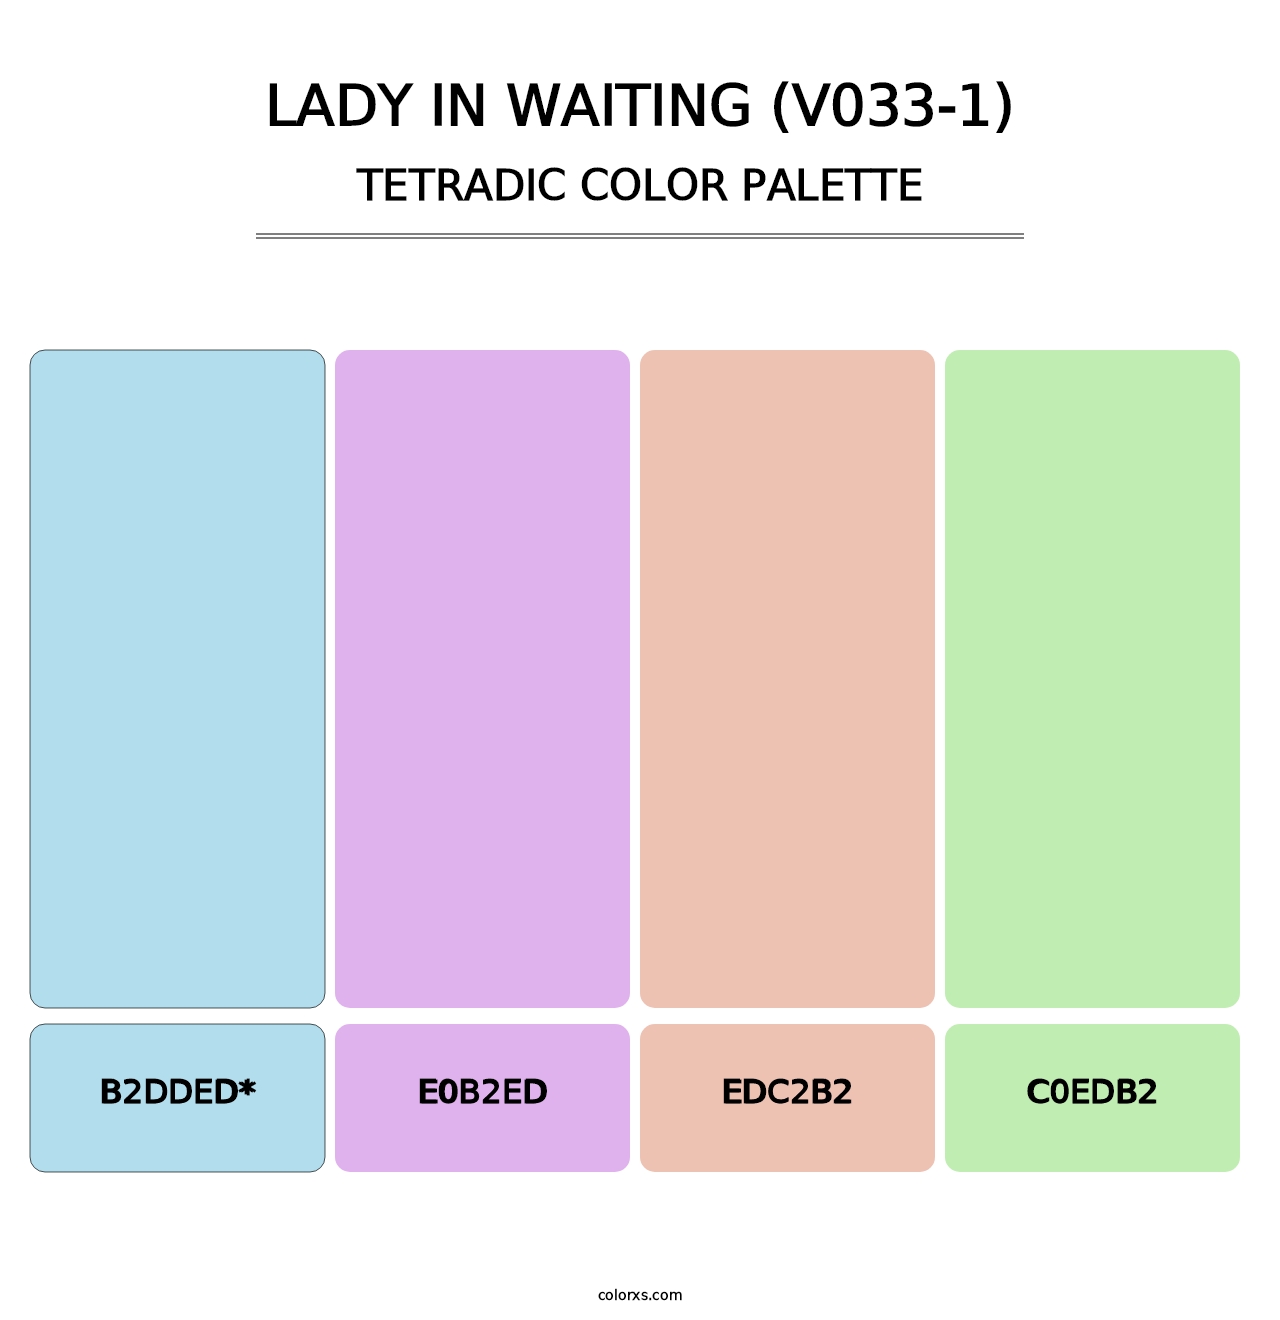 Lady in Waiting (V033-1) - Tetradic Color Palette